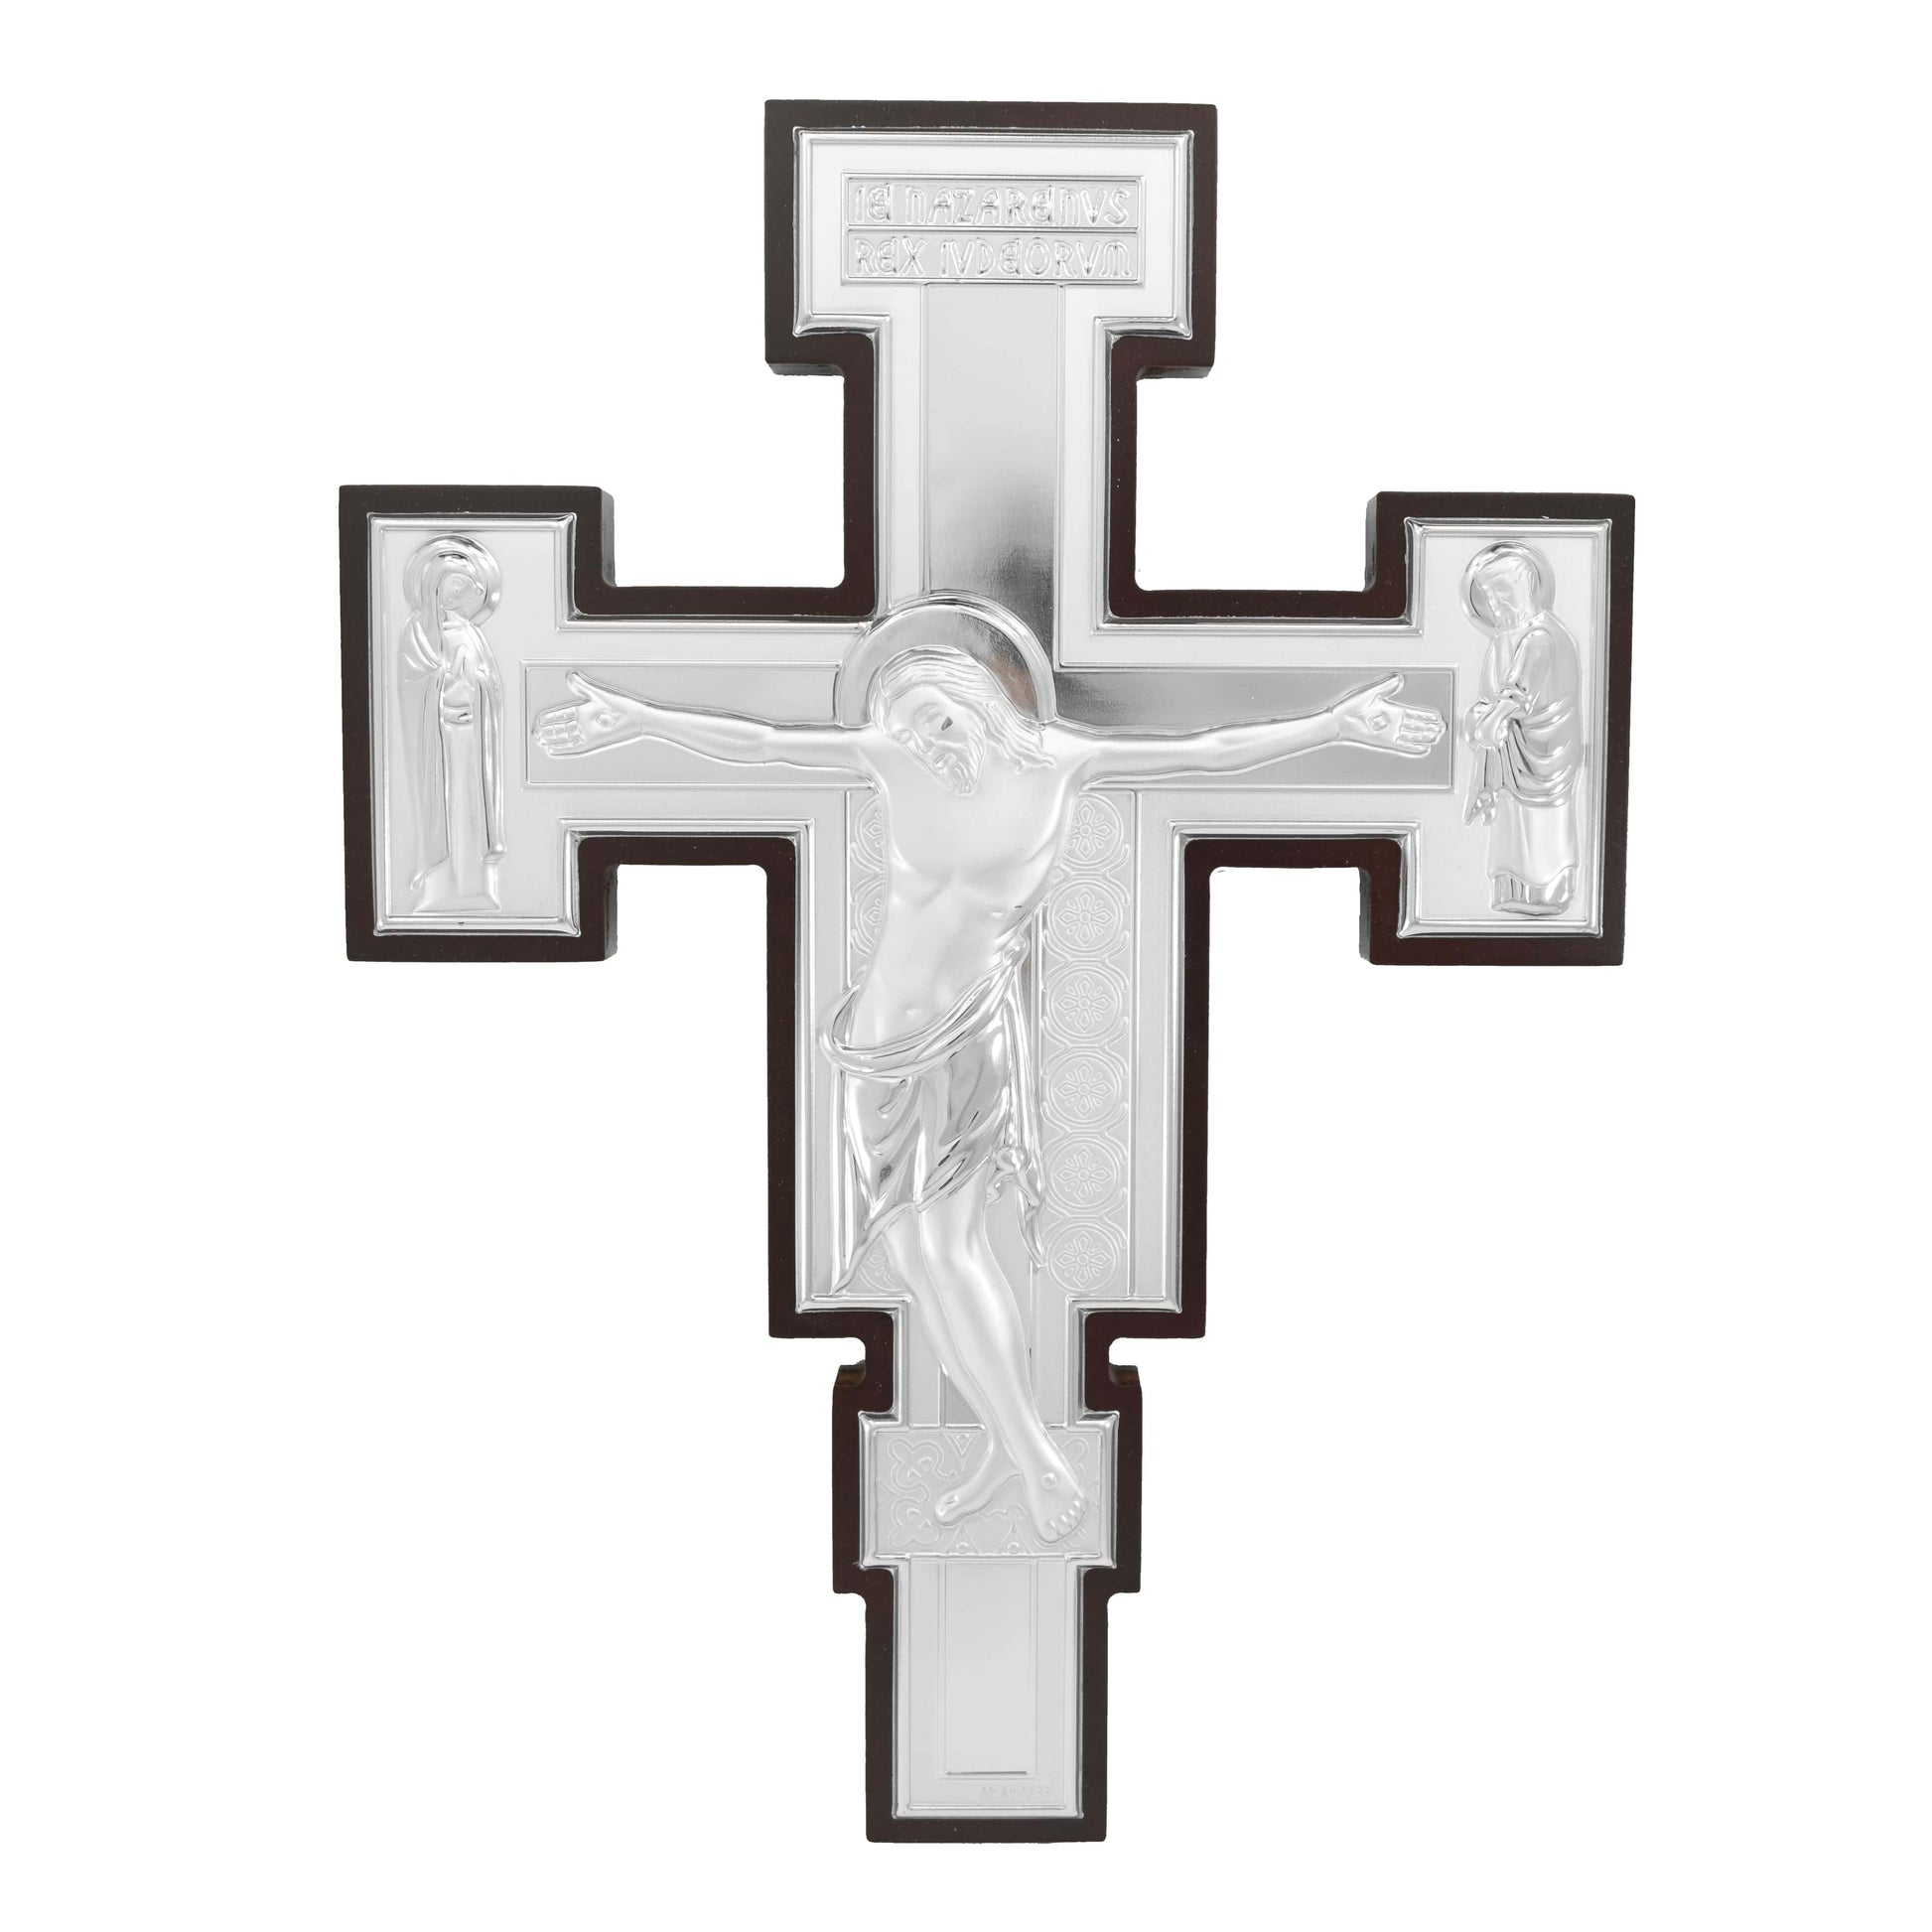 MONDO CATTOLICO 36 cm (14.17 in) Wooden Crucifix by Cimabue at Santa Croce With Silver Plaque